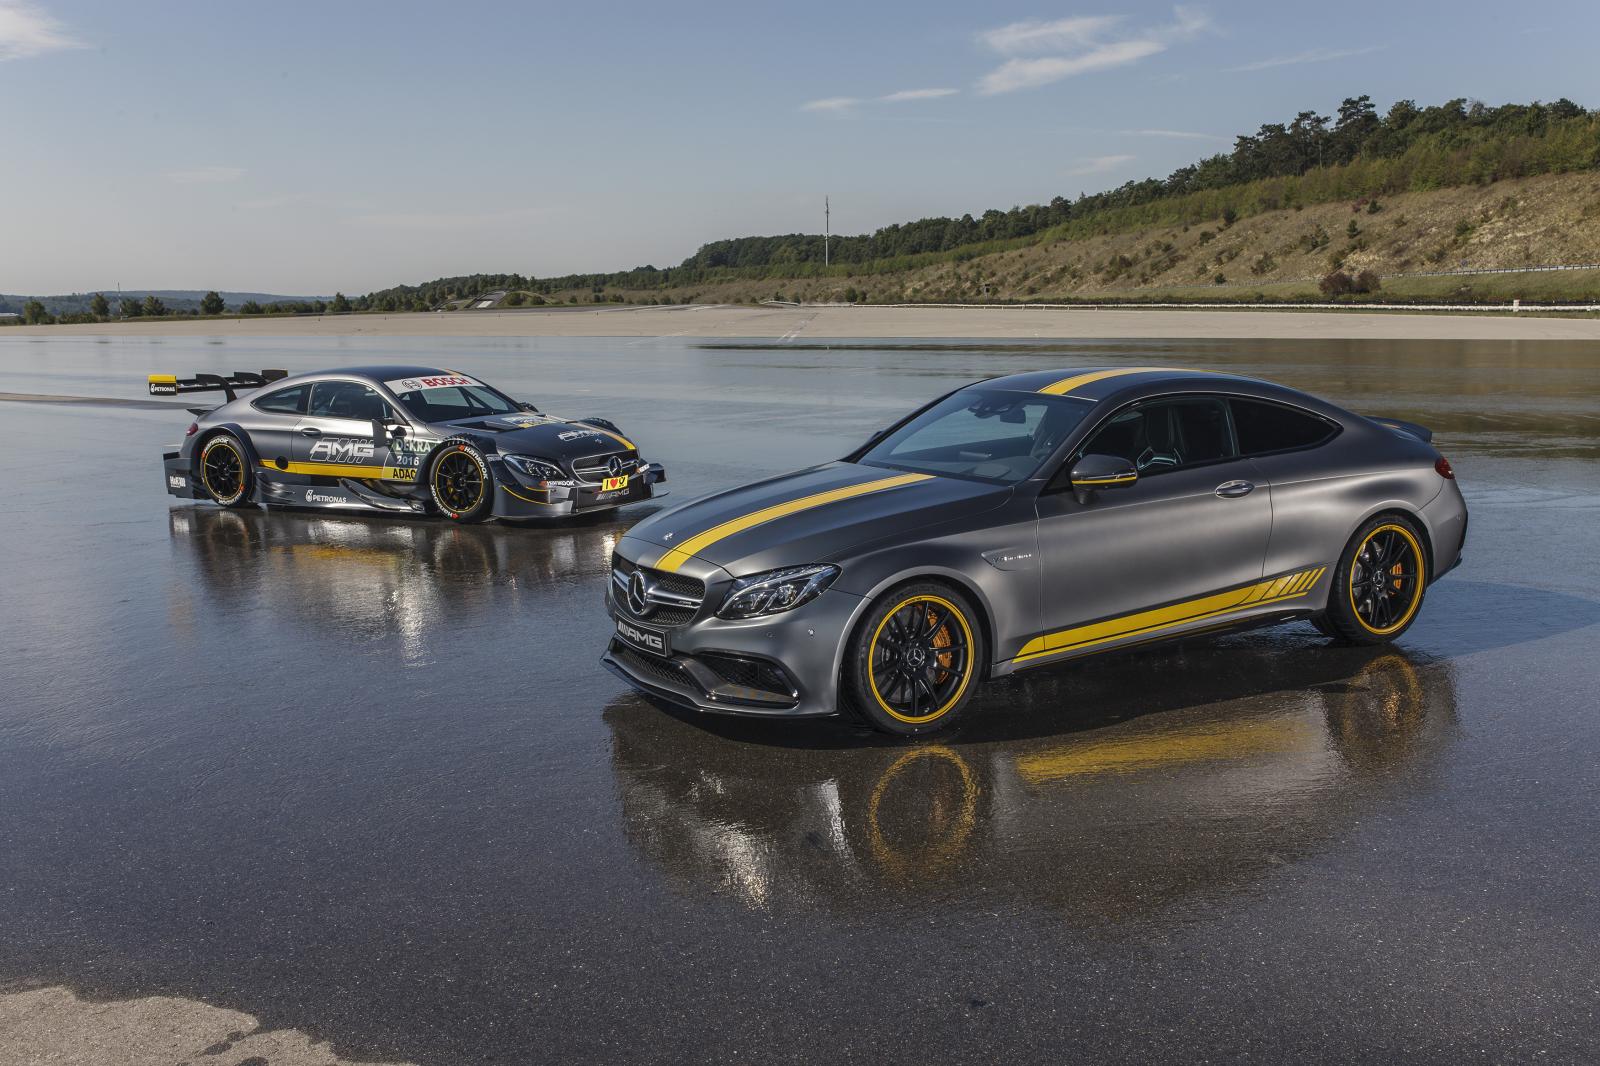 MERCEDES AMG C63 COUPE EDITION 1 RESM GALERS